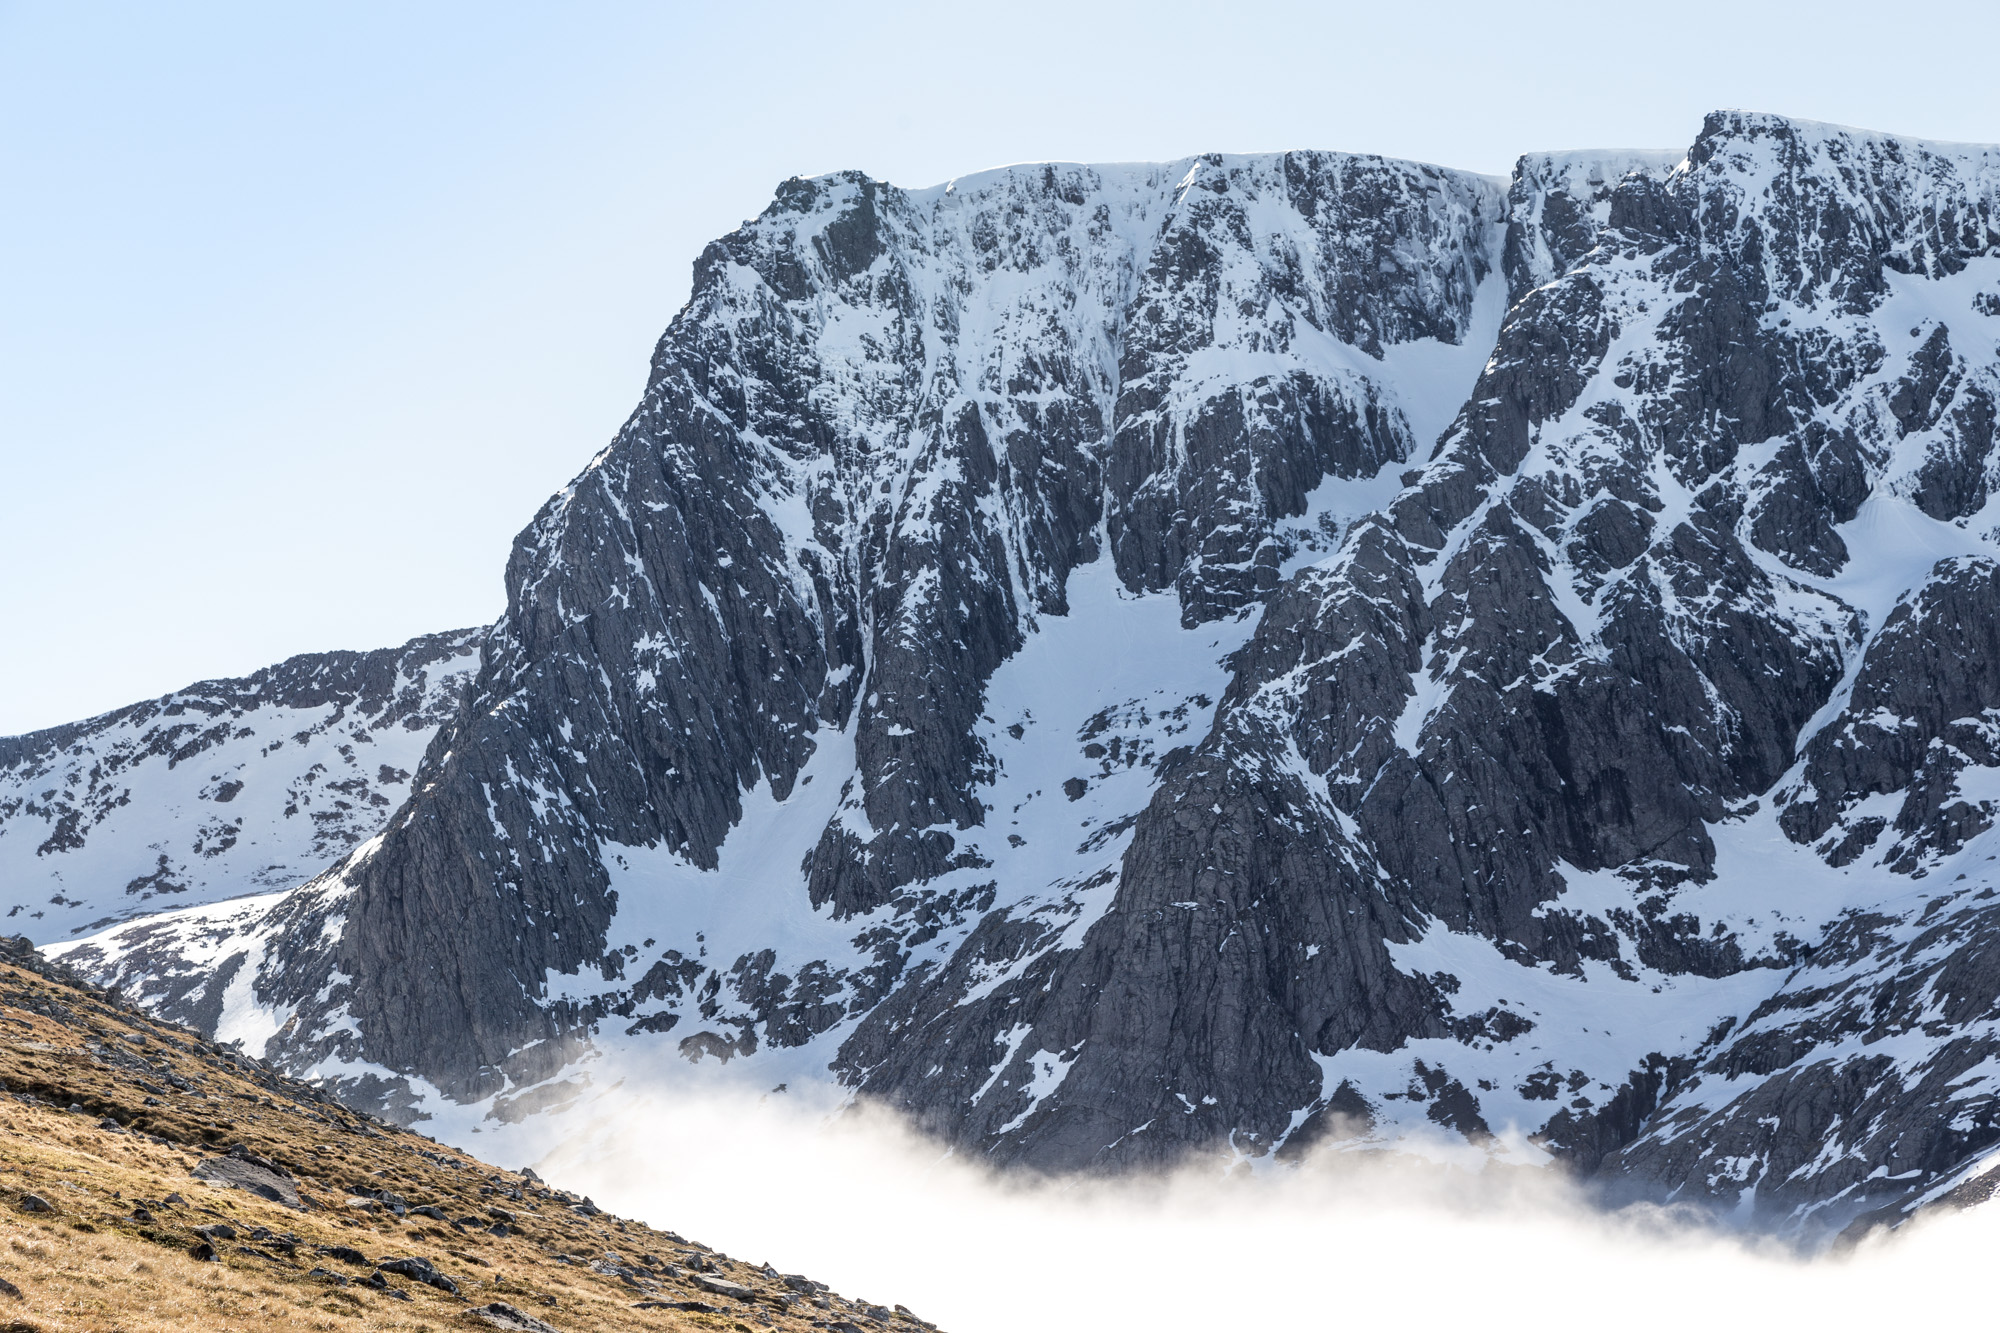 The incomparable north east face of Ben Nevis in all its icy glory! (photo credit: Richard Corfield)